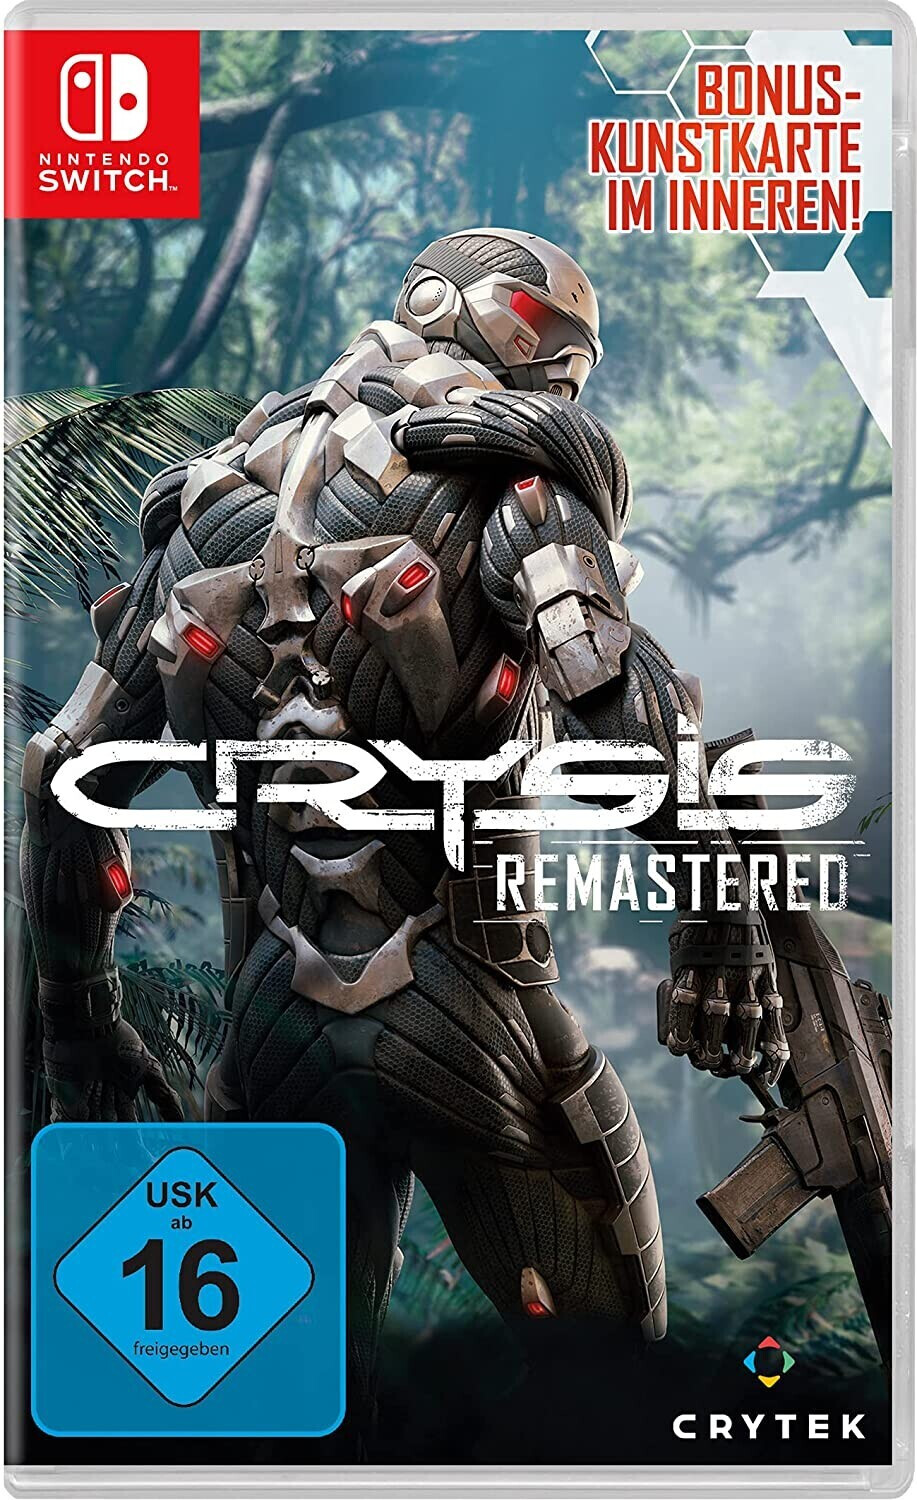 download crysis 3 remastered nintendo switch for free